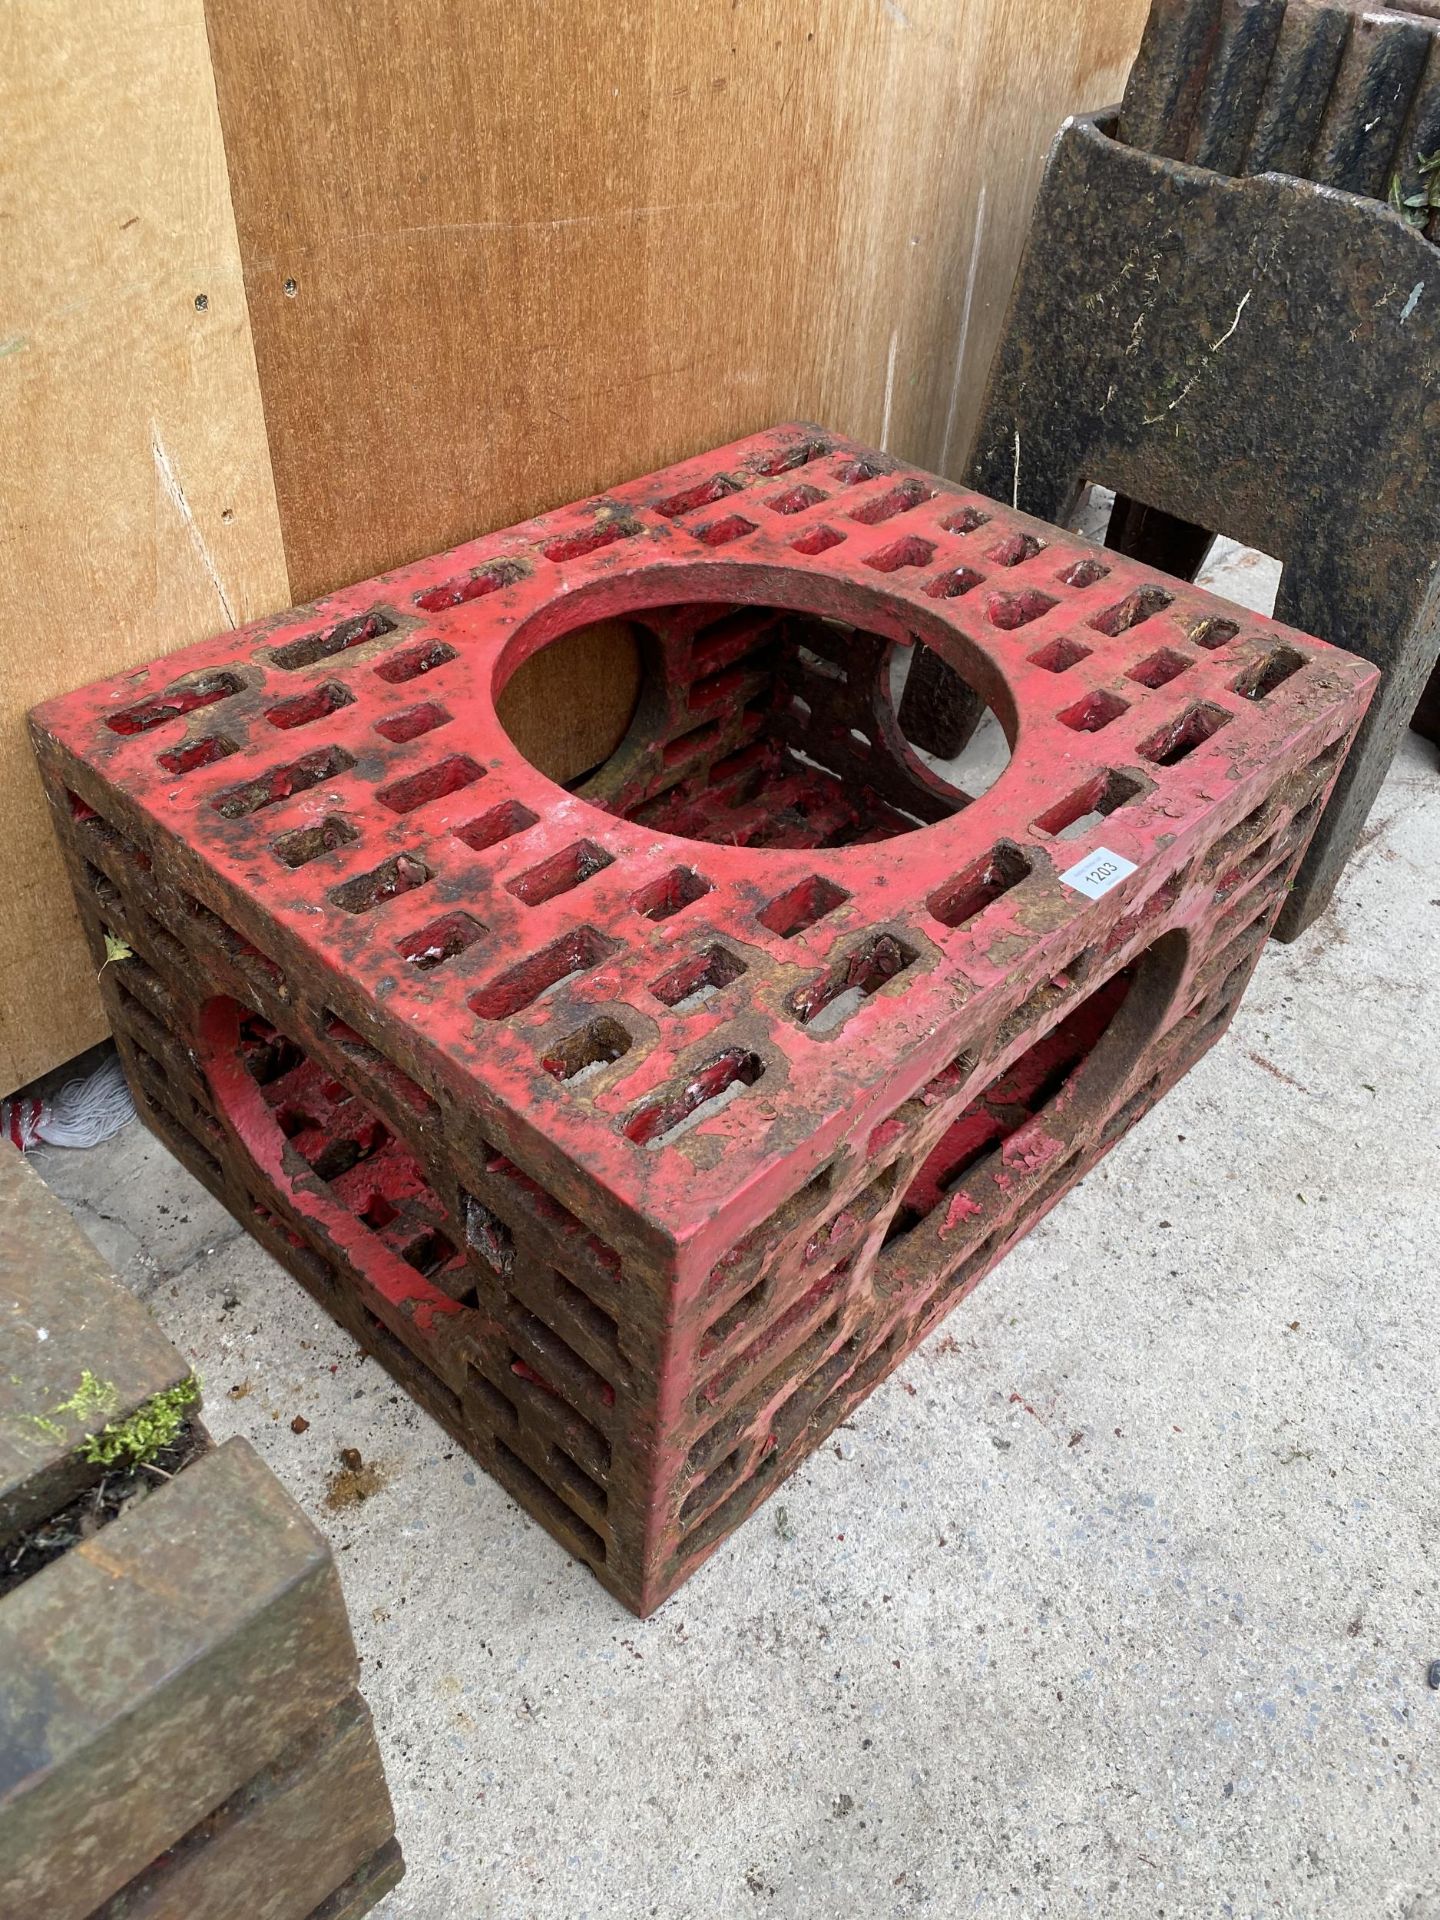 AN UNUSUAL CAST IRON WORKSHOP MILLING BASE - Image 2 of 5